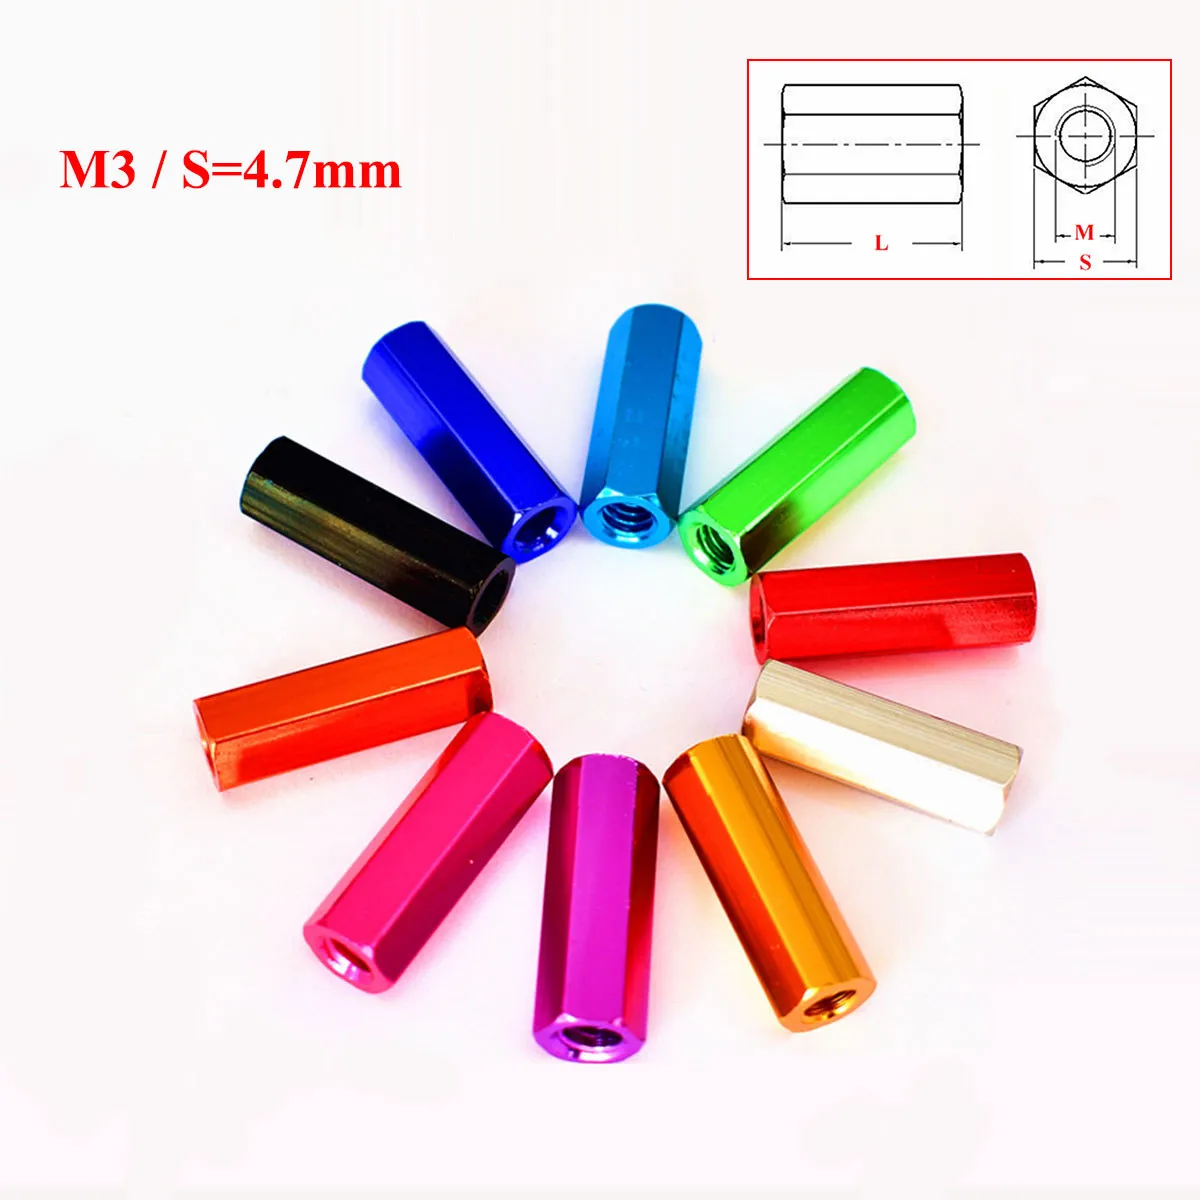 

M3 Aluminum Alloy Hex Standoff Pillars Alu Hexagon Female Threaded Studs Spacer Nuts Hollow Column Sleeving Anodized 10 Colors